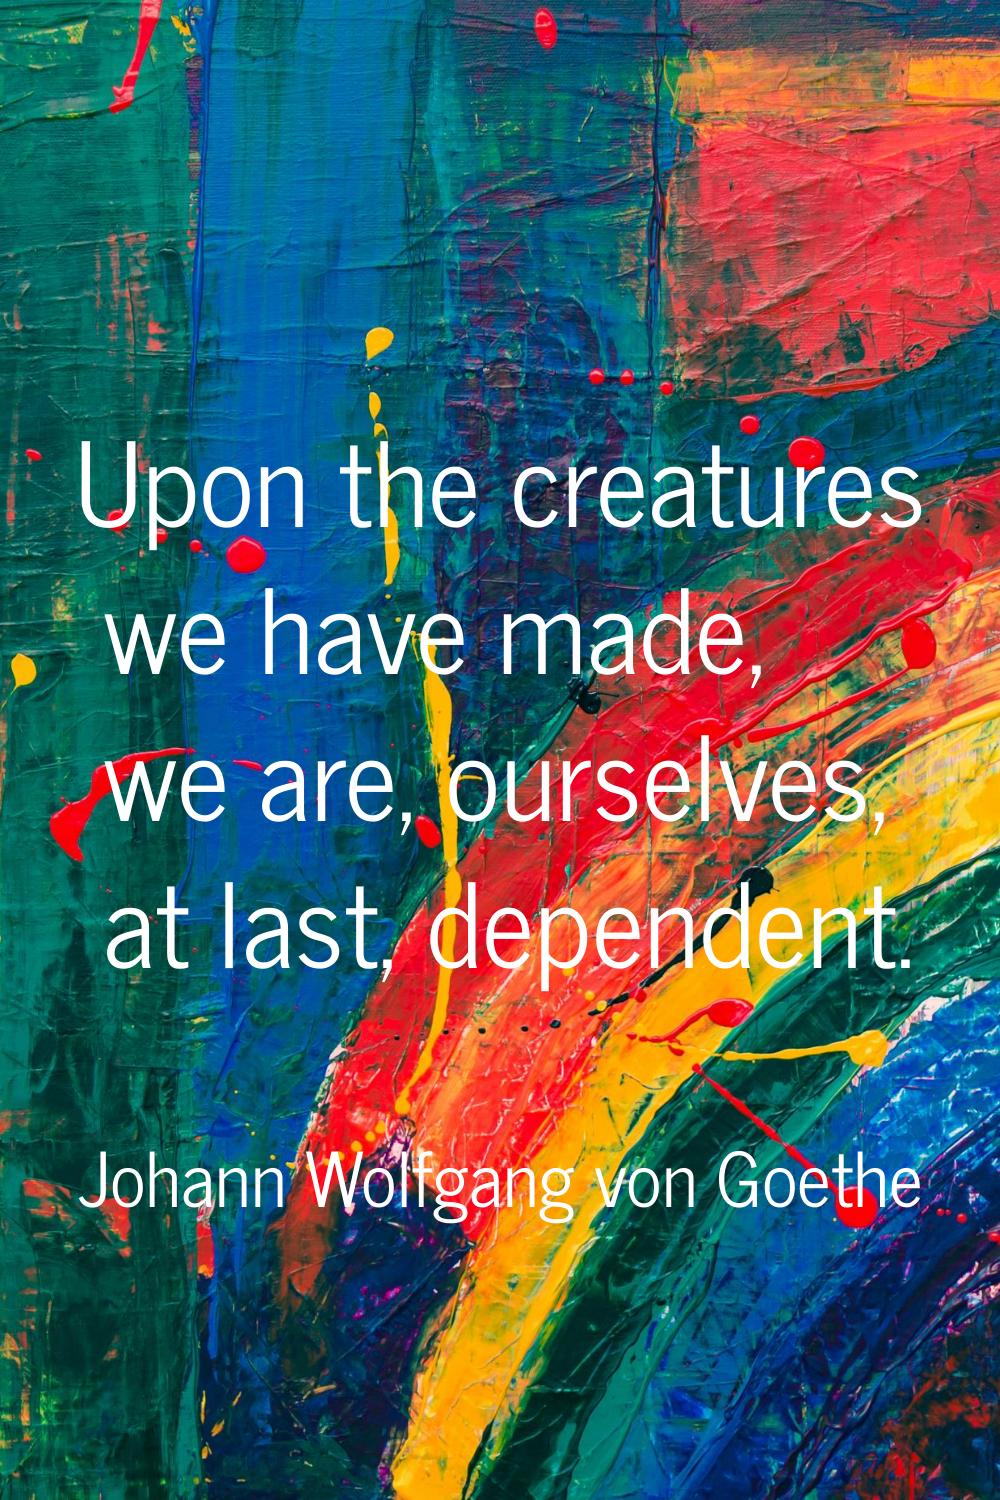 Upon the creatures we have made, we are, ourselves, at last, dependent.